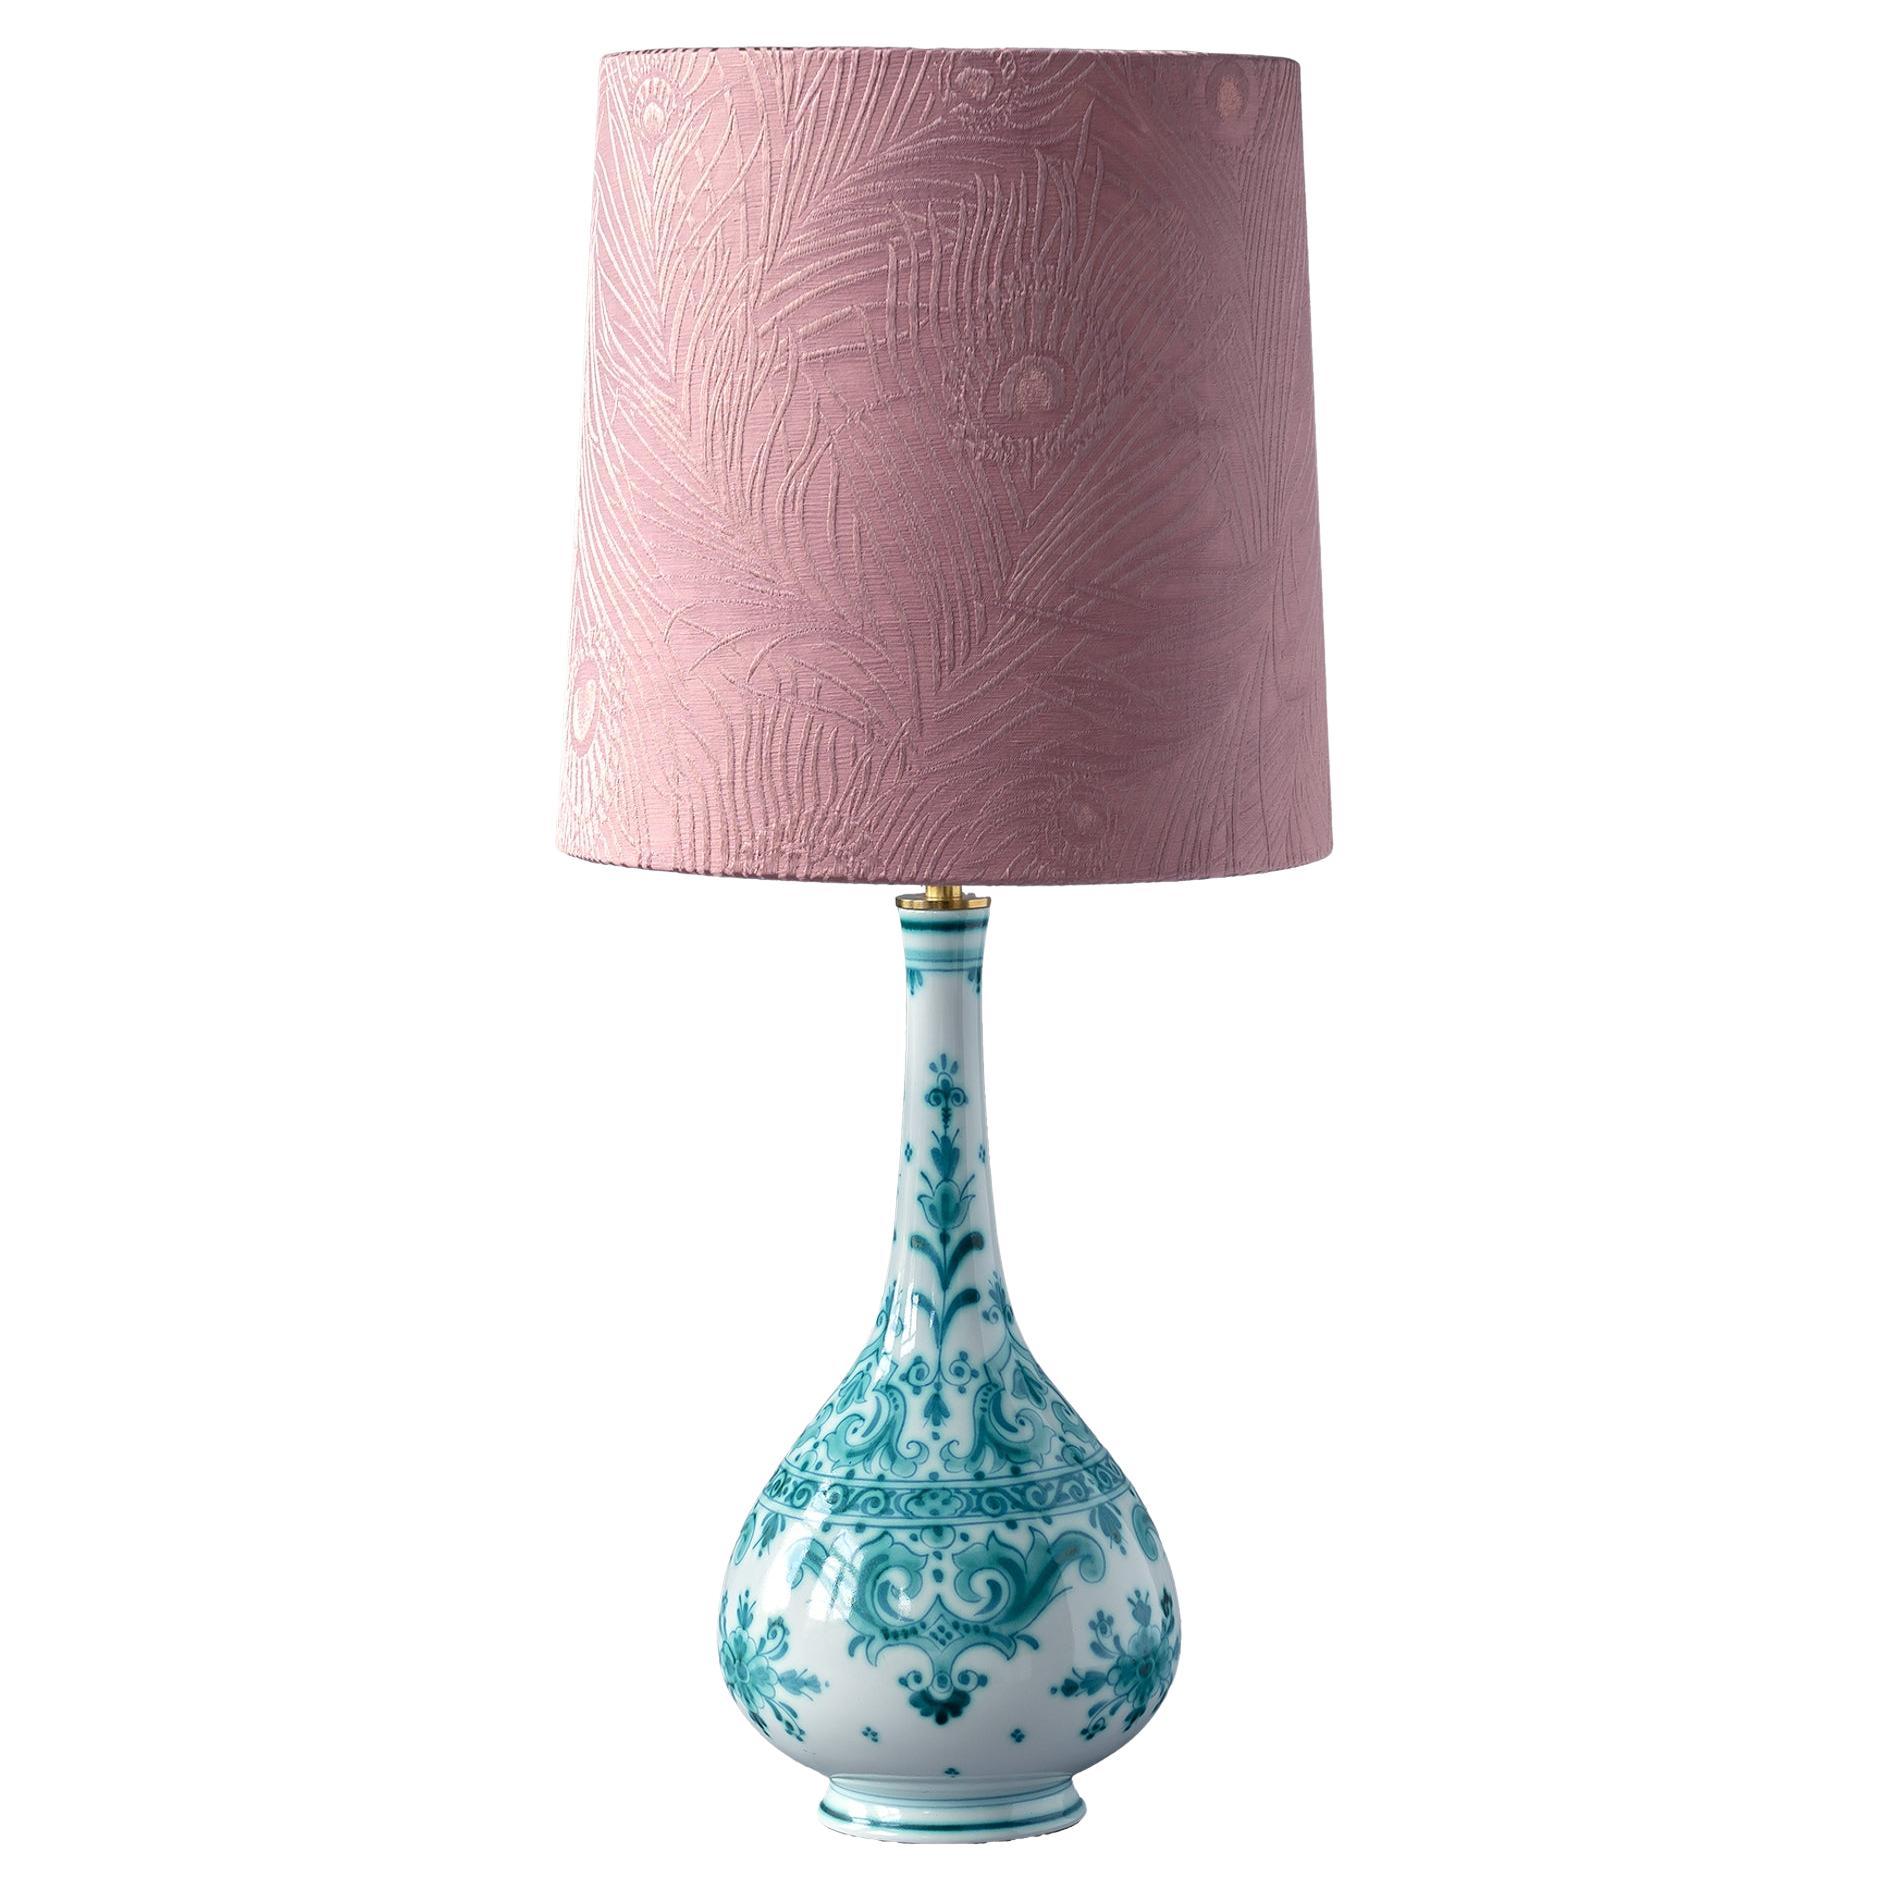 Royal Delft Delvert Lamp, Liberty London Lampshade, 1968-1976 For Sale